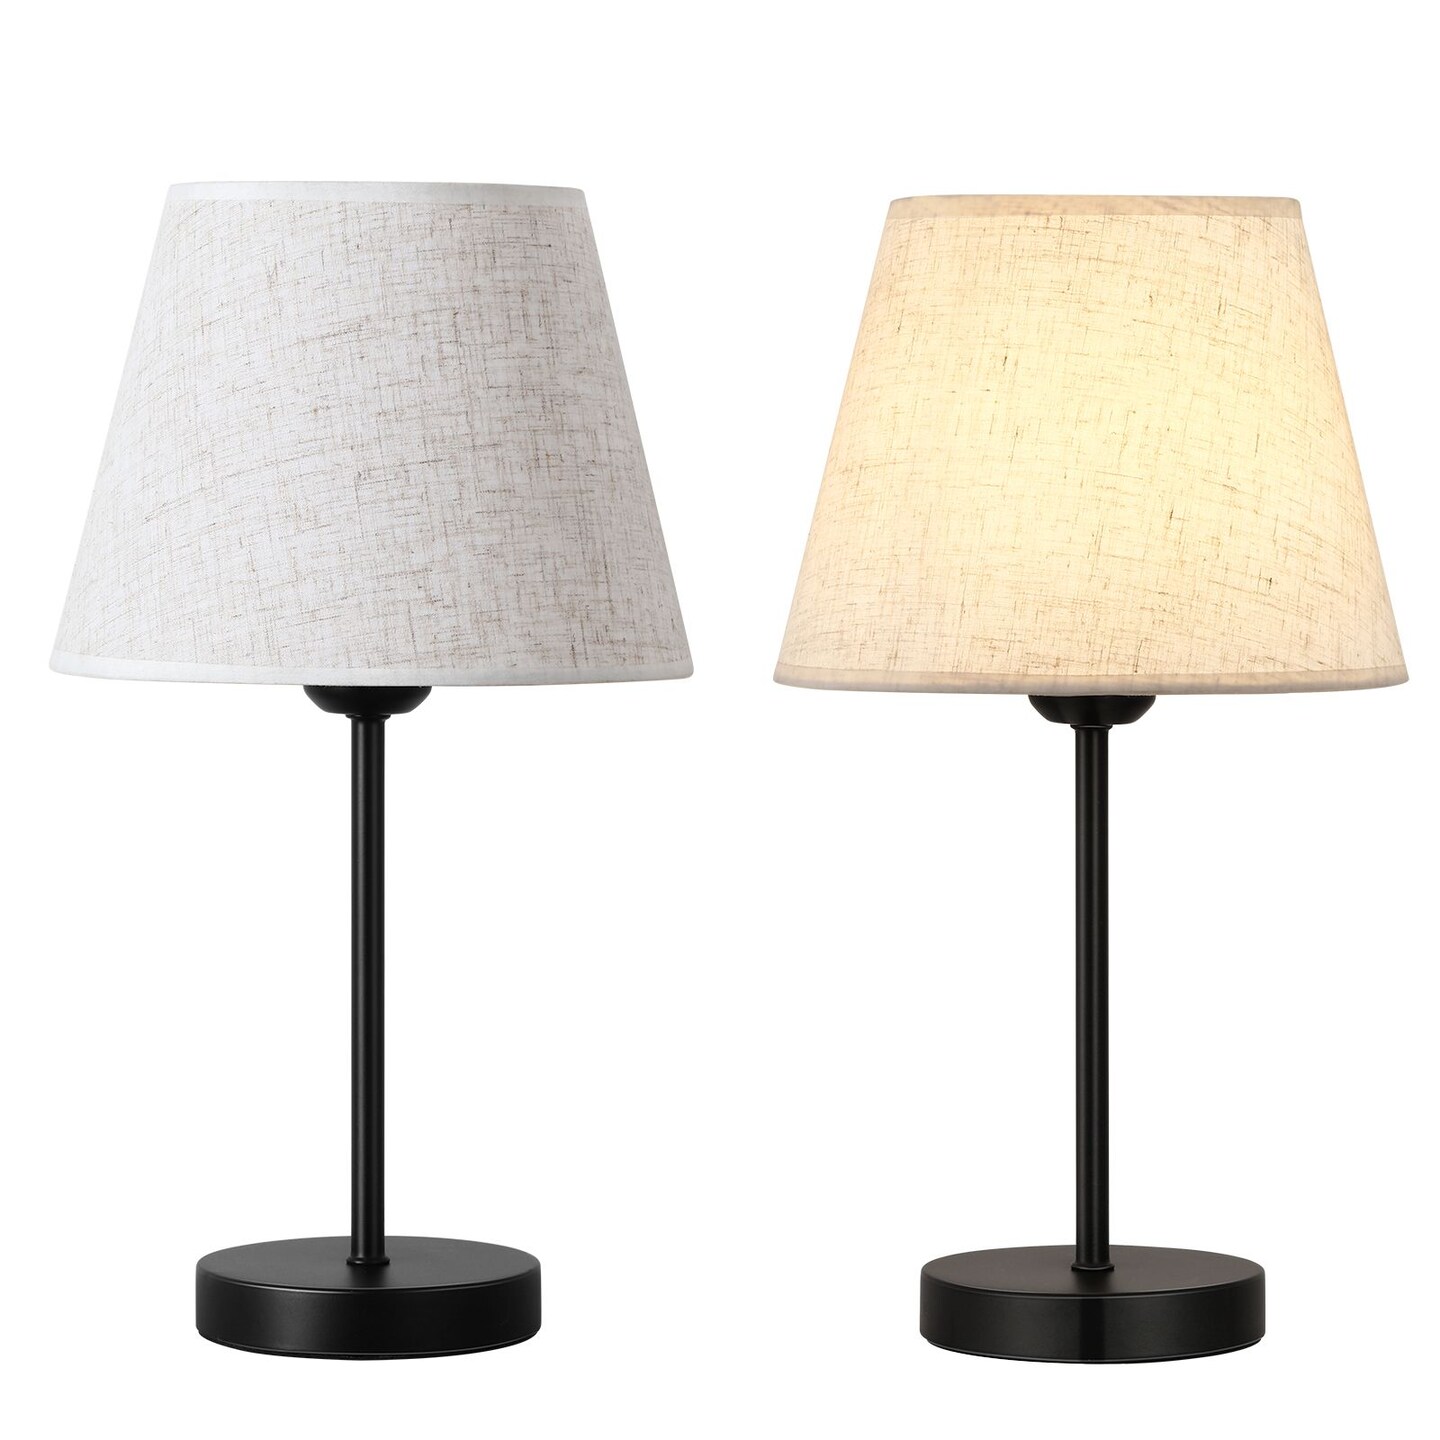 Modern Classic Nightstand Table Lamps Bedside Table Lamp Set of 2